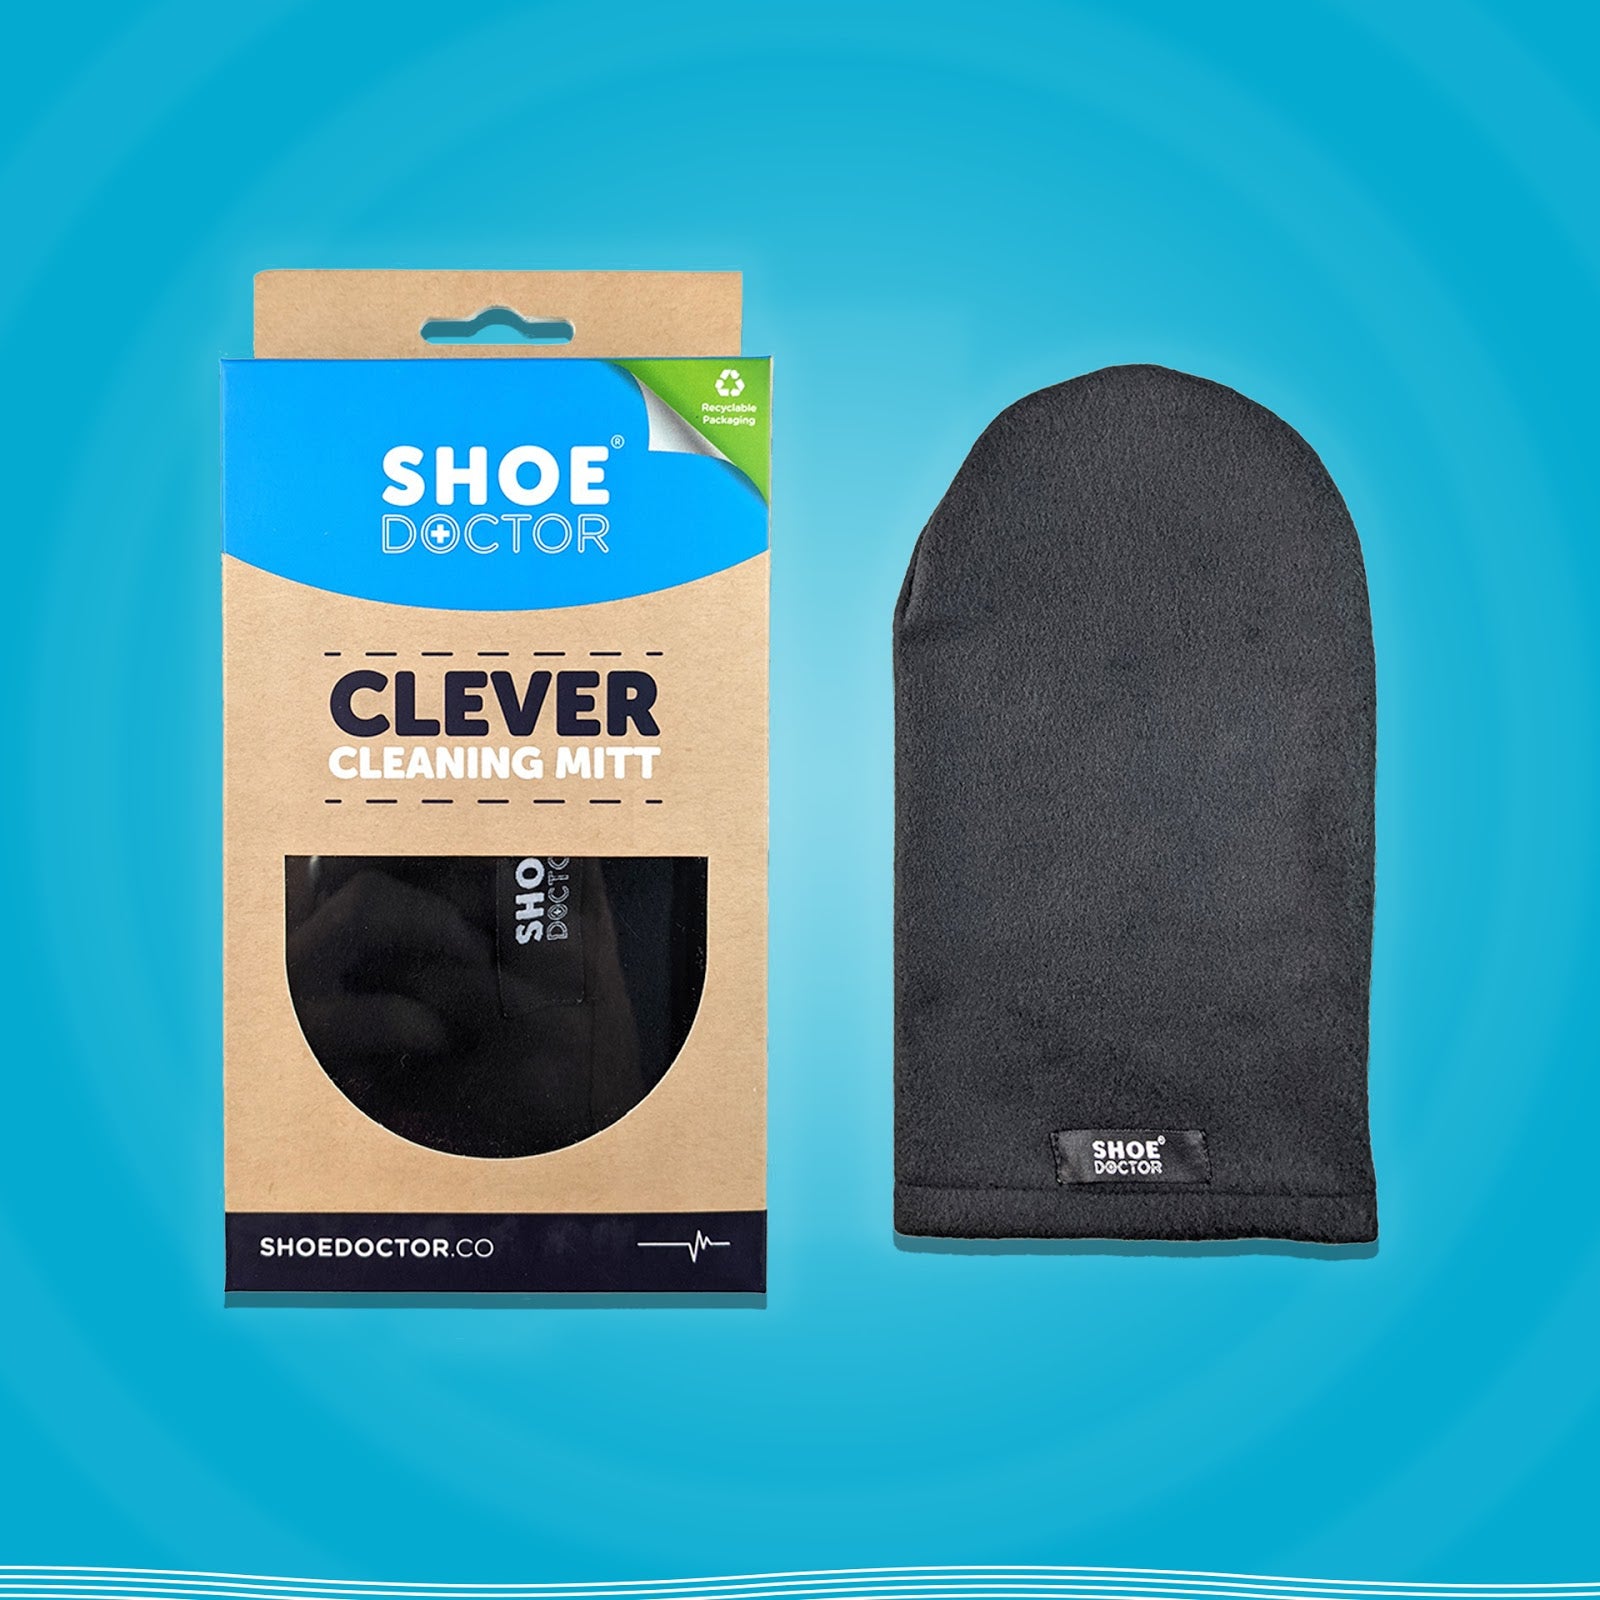 Shoe Doctor® Clever Cleaning Mitt